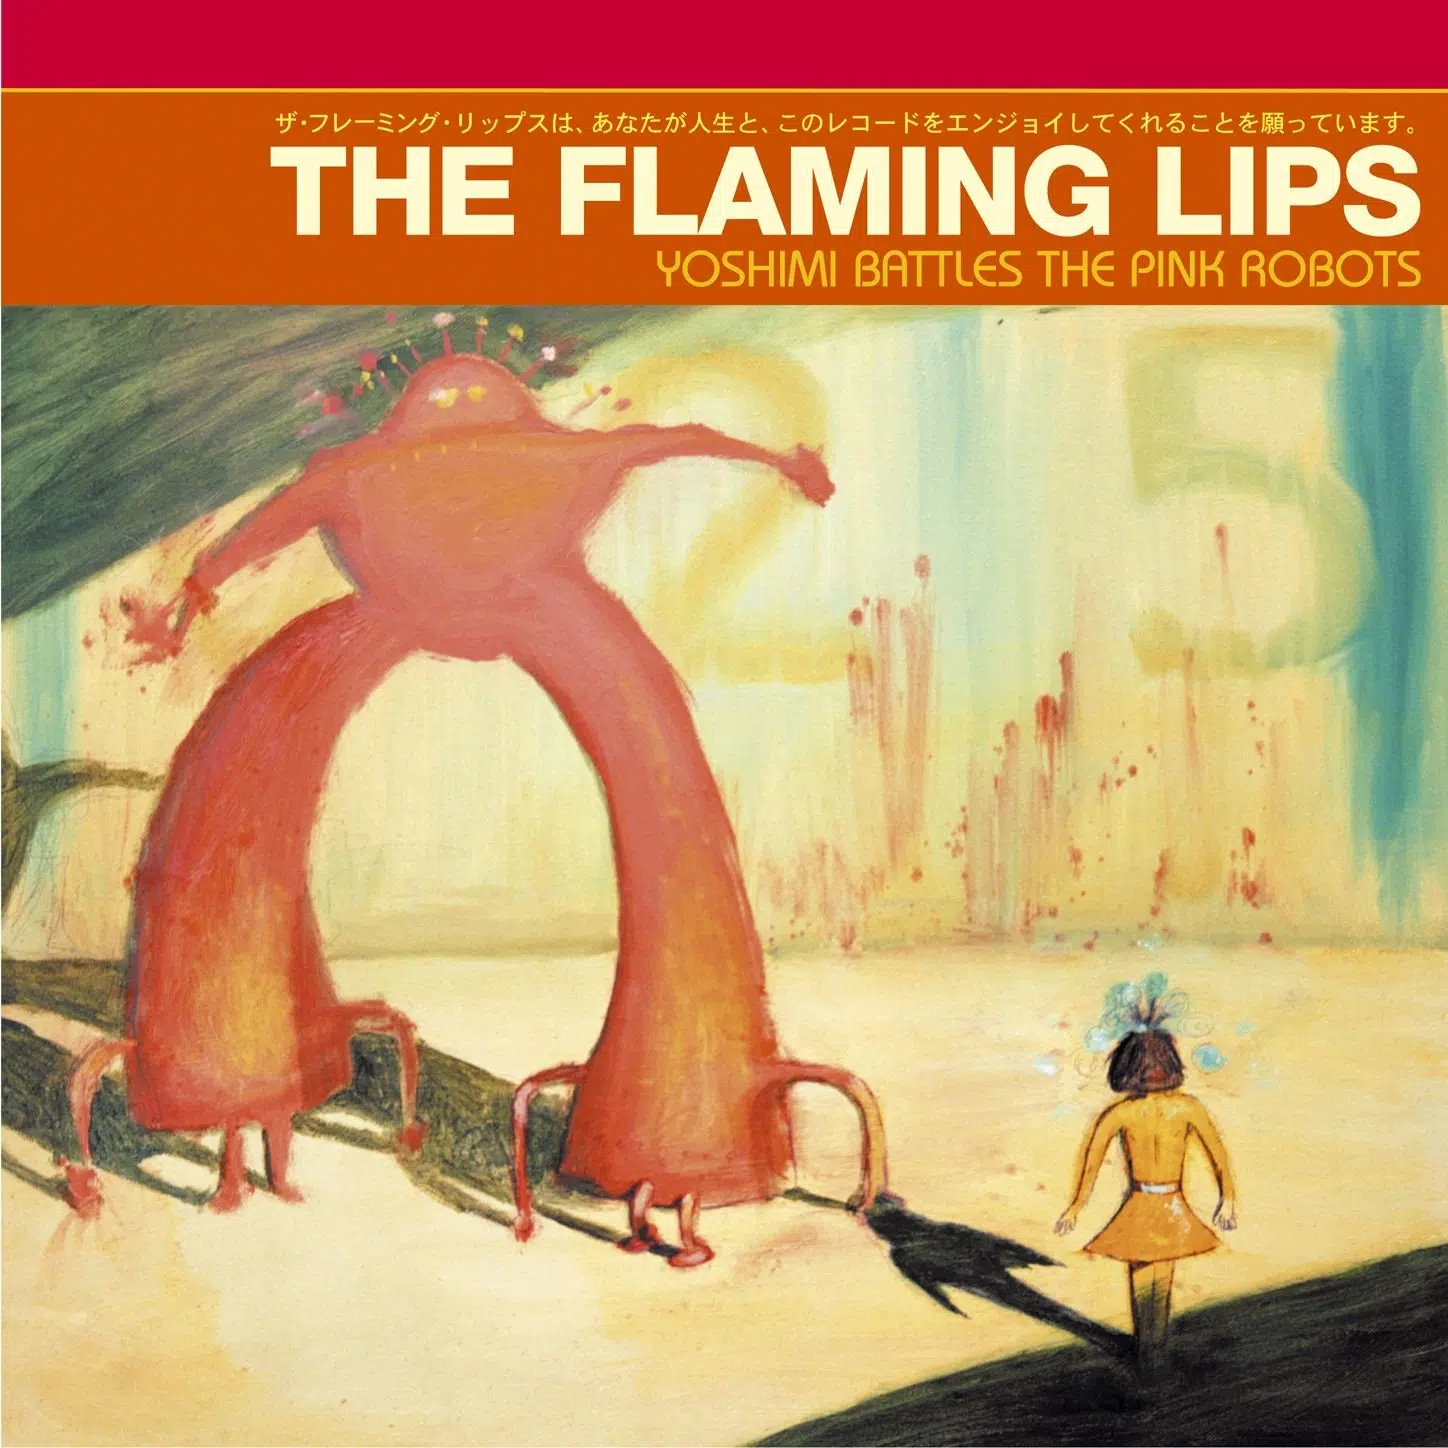 The Flaming Lips Yoshimi Battles the Pink Robots